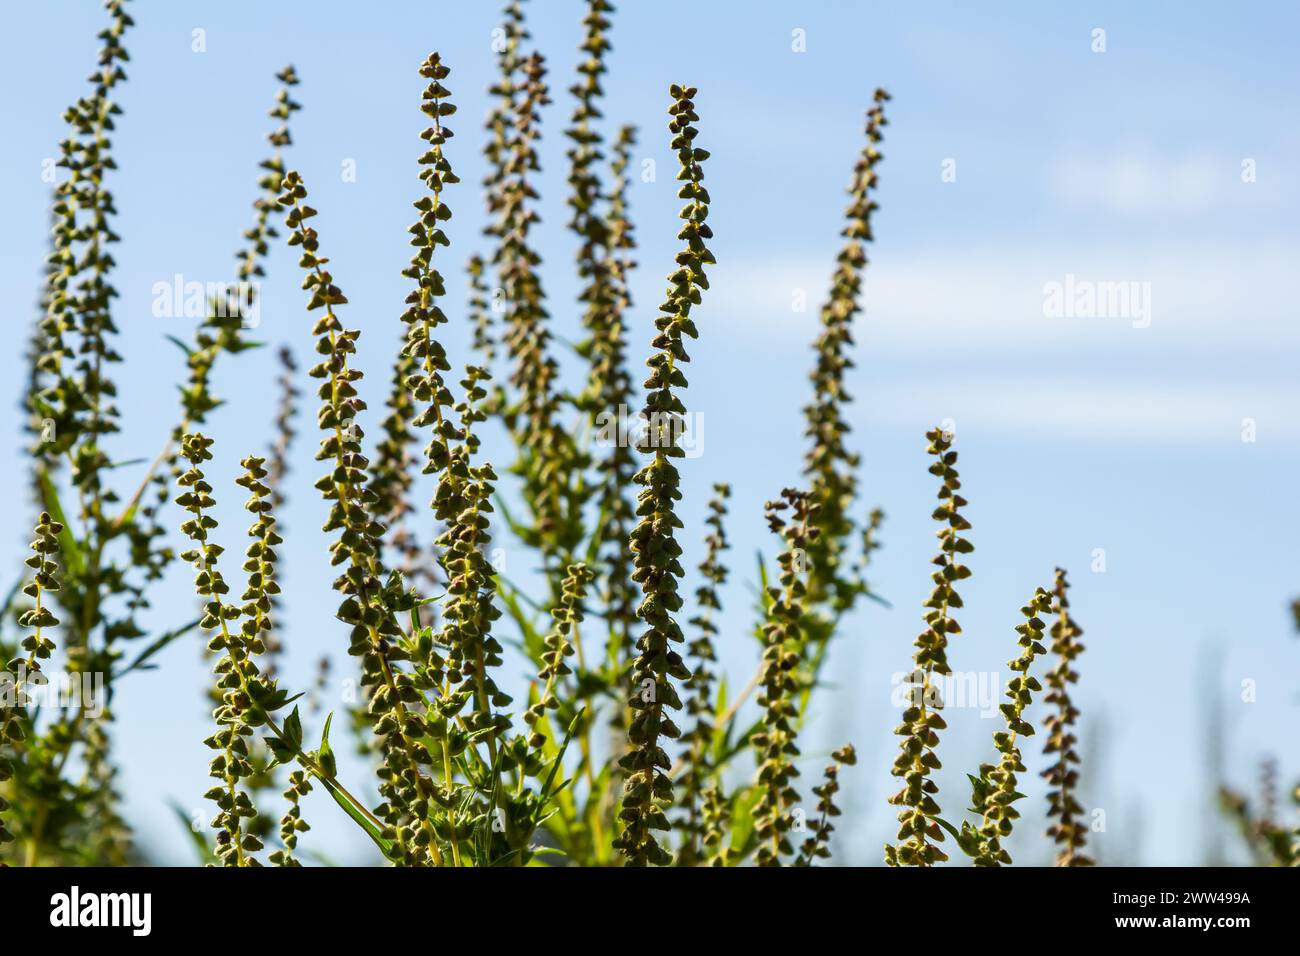 Ambrosia trifida, the giant ragweed, is a species of flowering plant in the family Asteraceae. Stock Photo